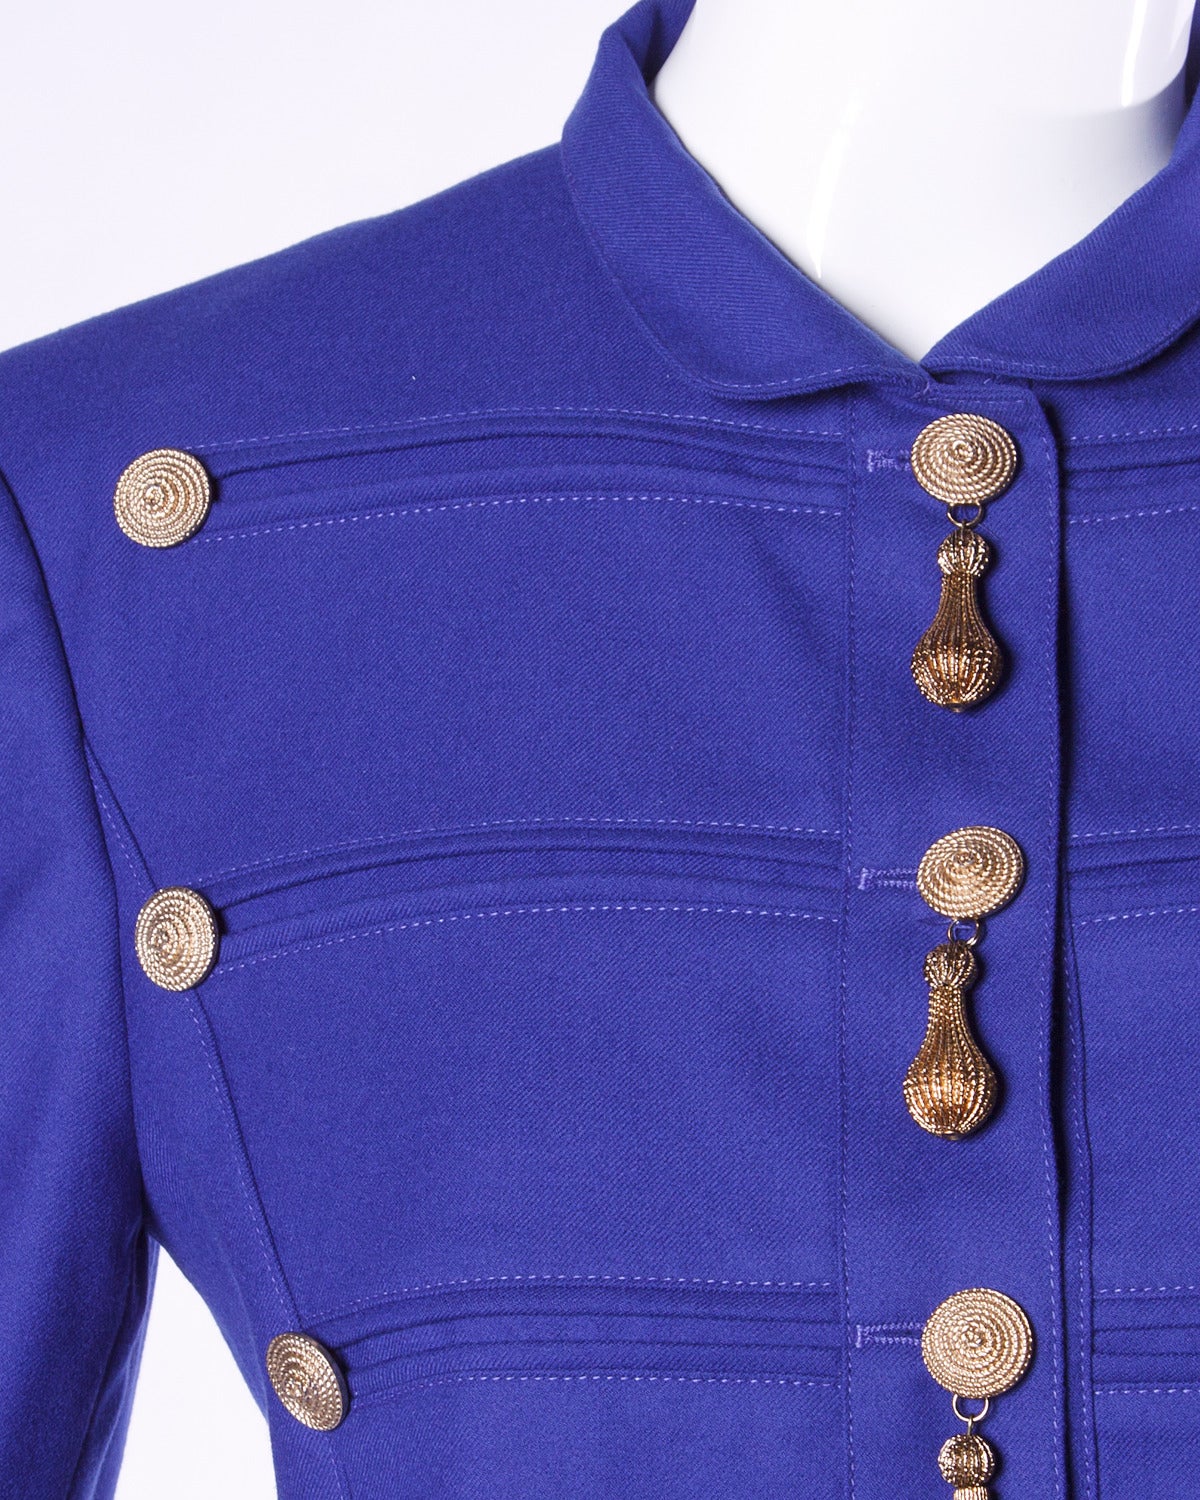 Louis Feraud military-inspired jacket with gold-tone hardware and teardrop "tassel" charms.

Details:

Fully Lined
Front Snap & Button Closure
Marked Size: US 6/ UK 10/ F 38/ D 36
Color: Indigo
Fabric: Wool/ Viscose